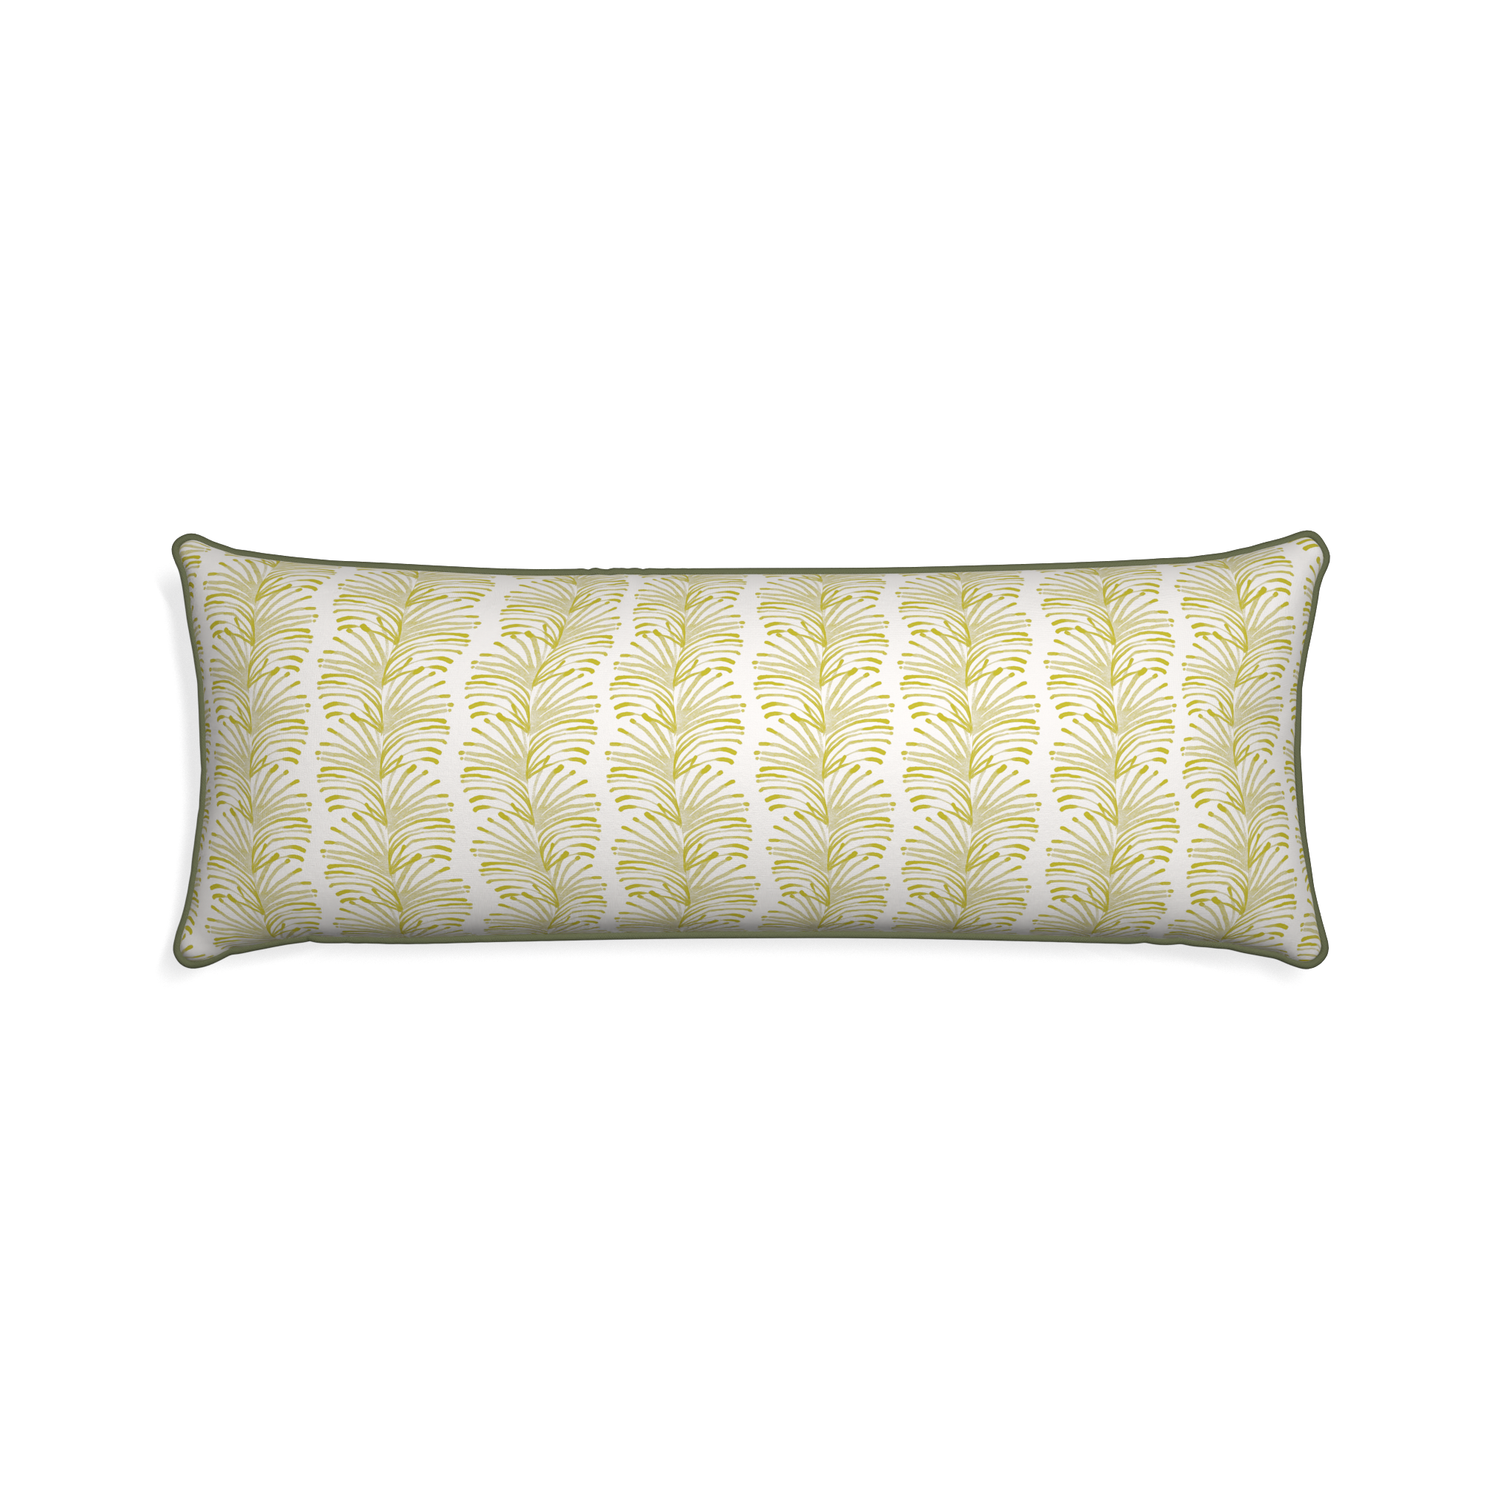 Xl-lumbar emma chartreuse custom pillow with f piping on white background